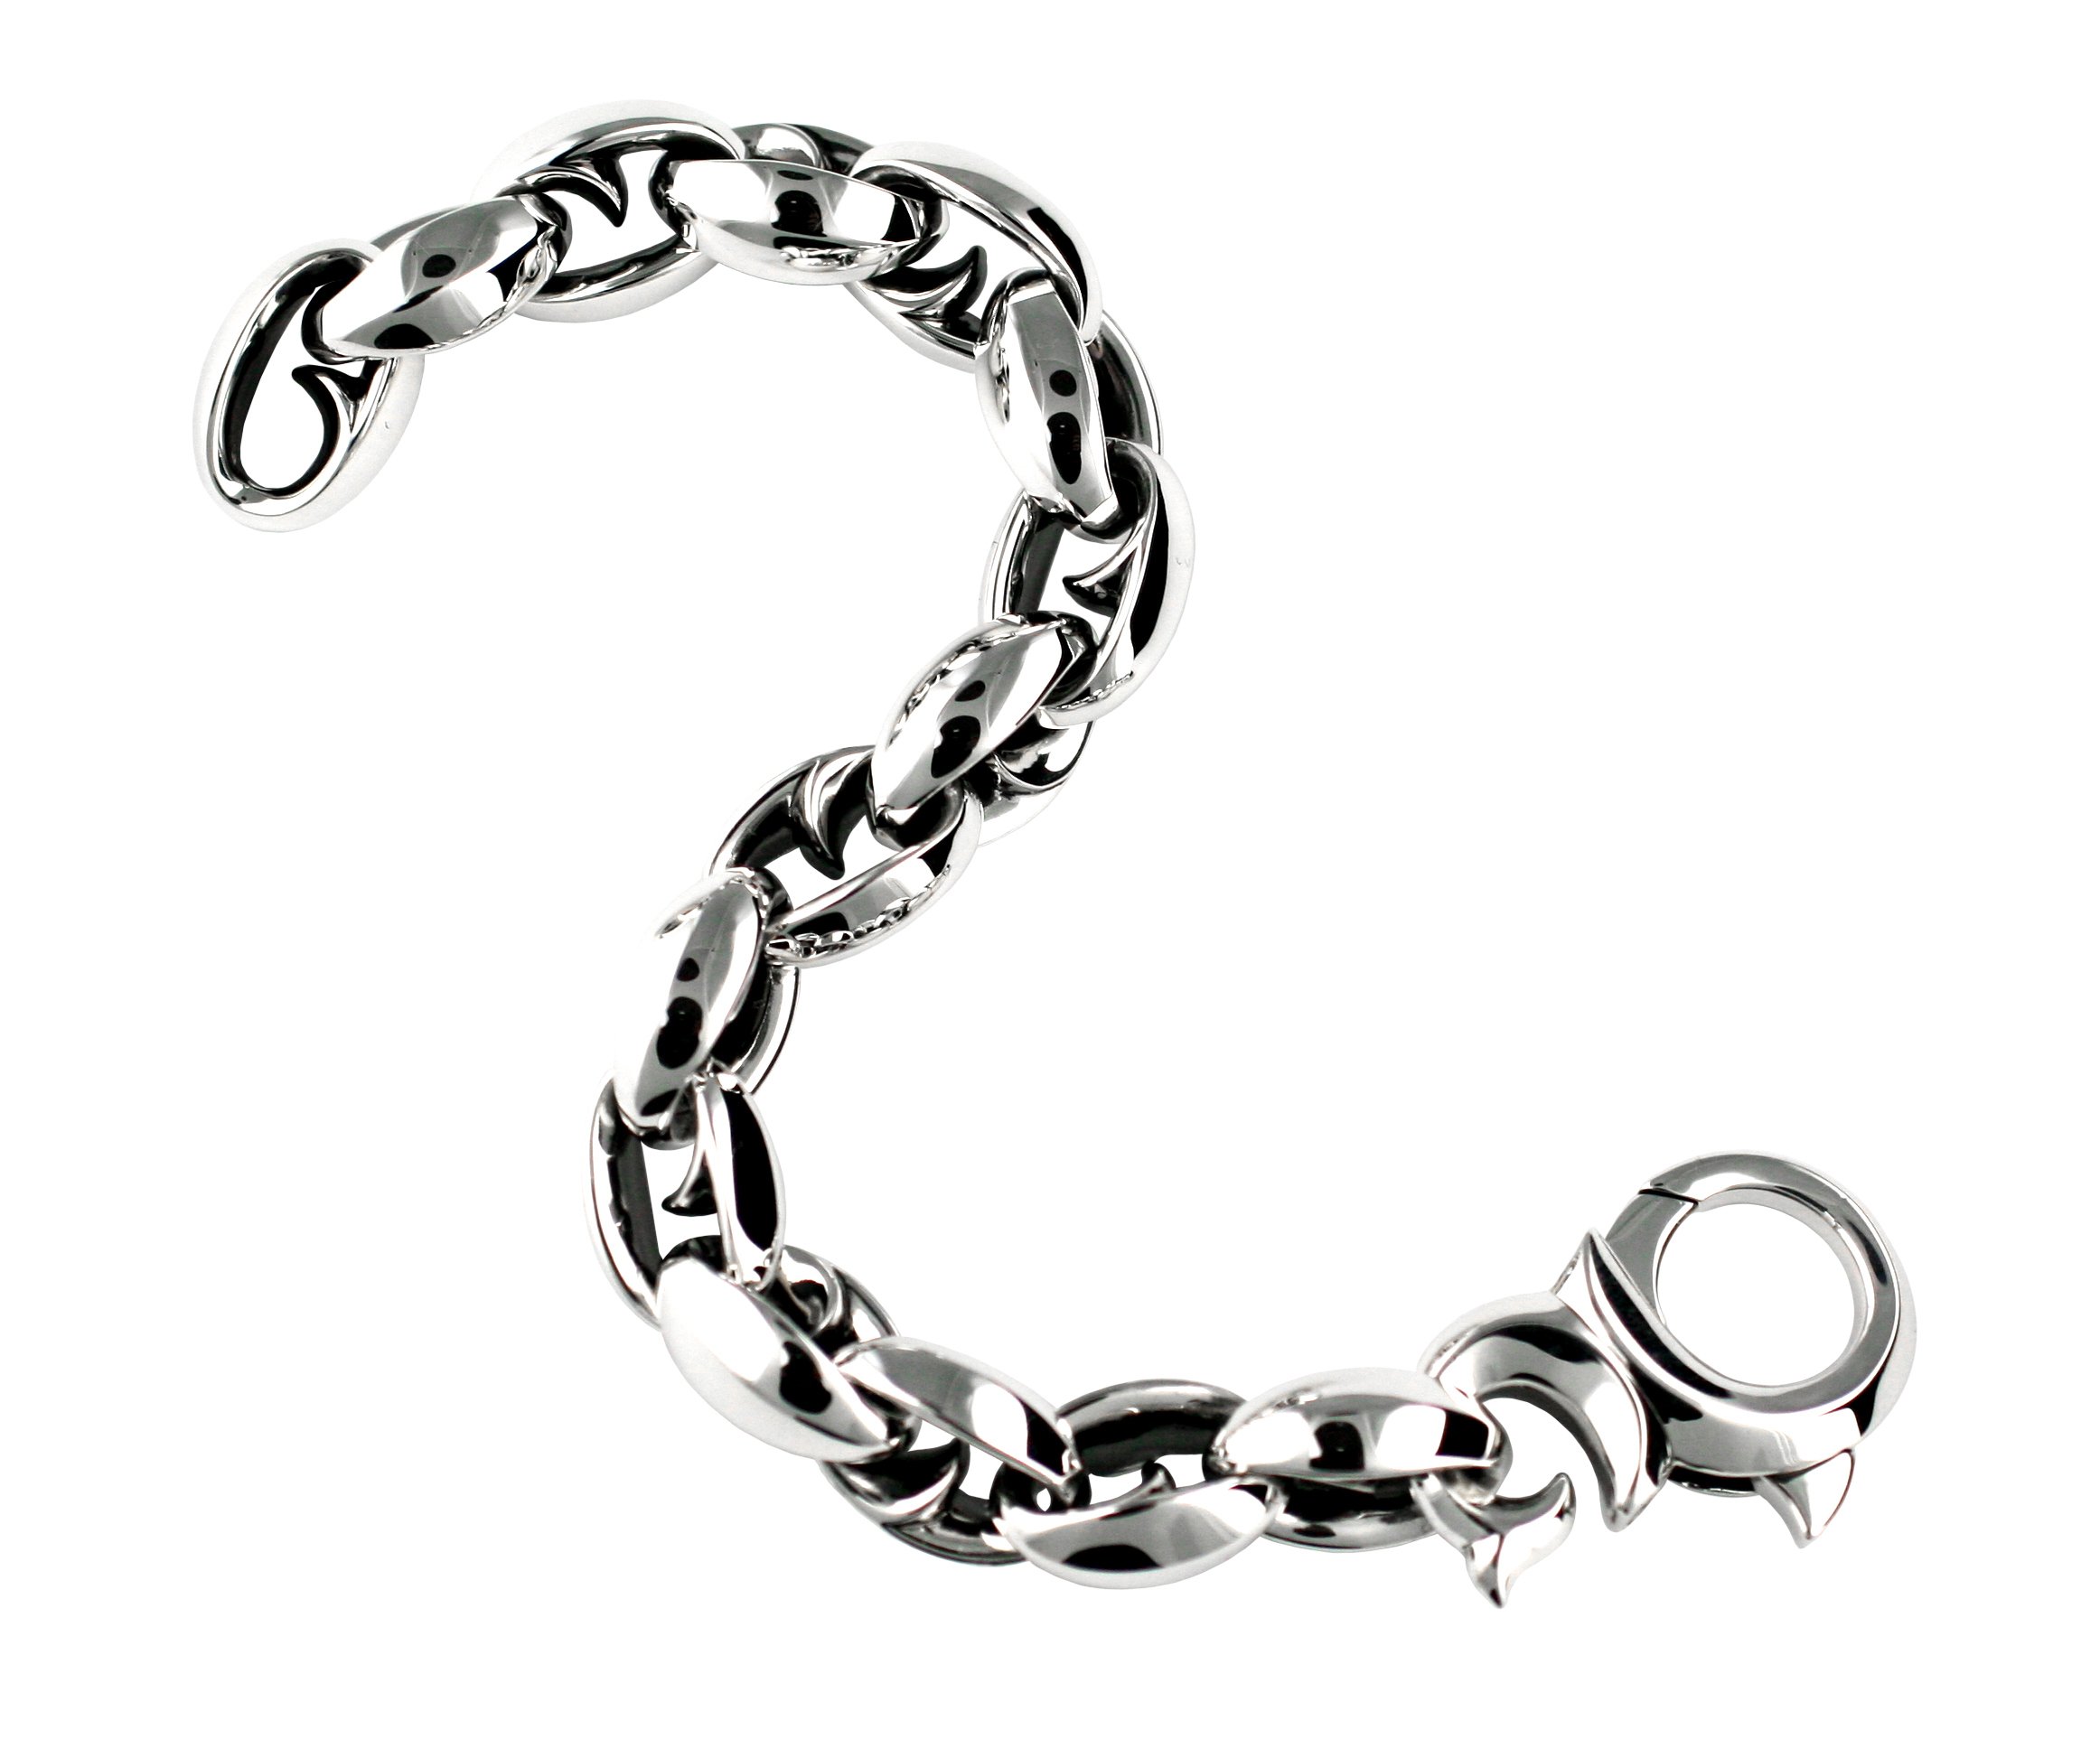 Thorn Addiction Large Oval Bracelet in Sterling Silver - 9"